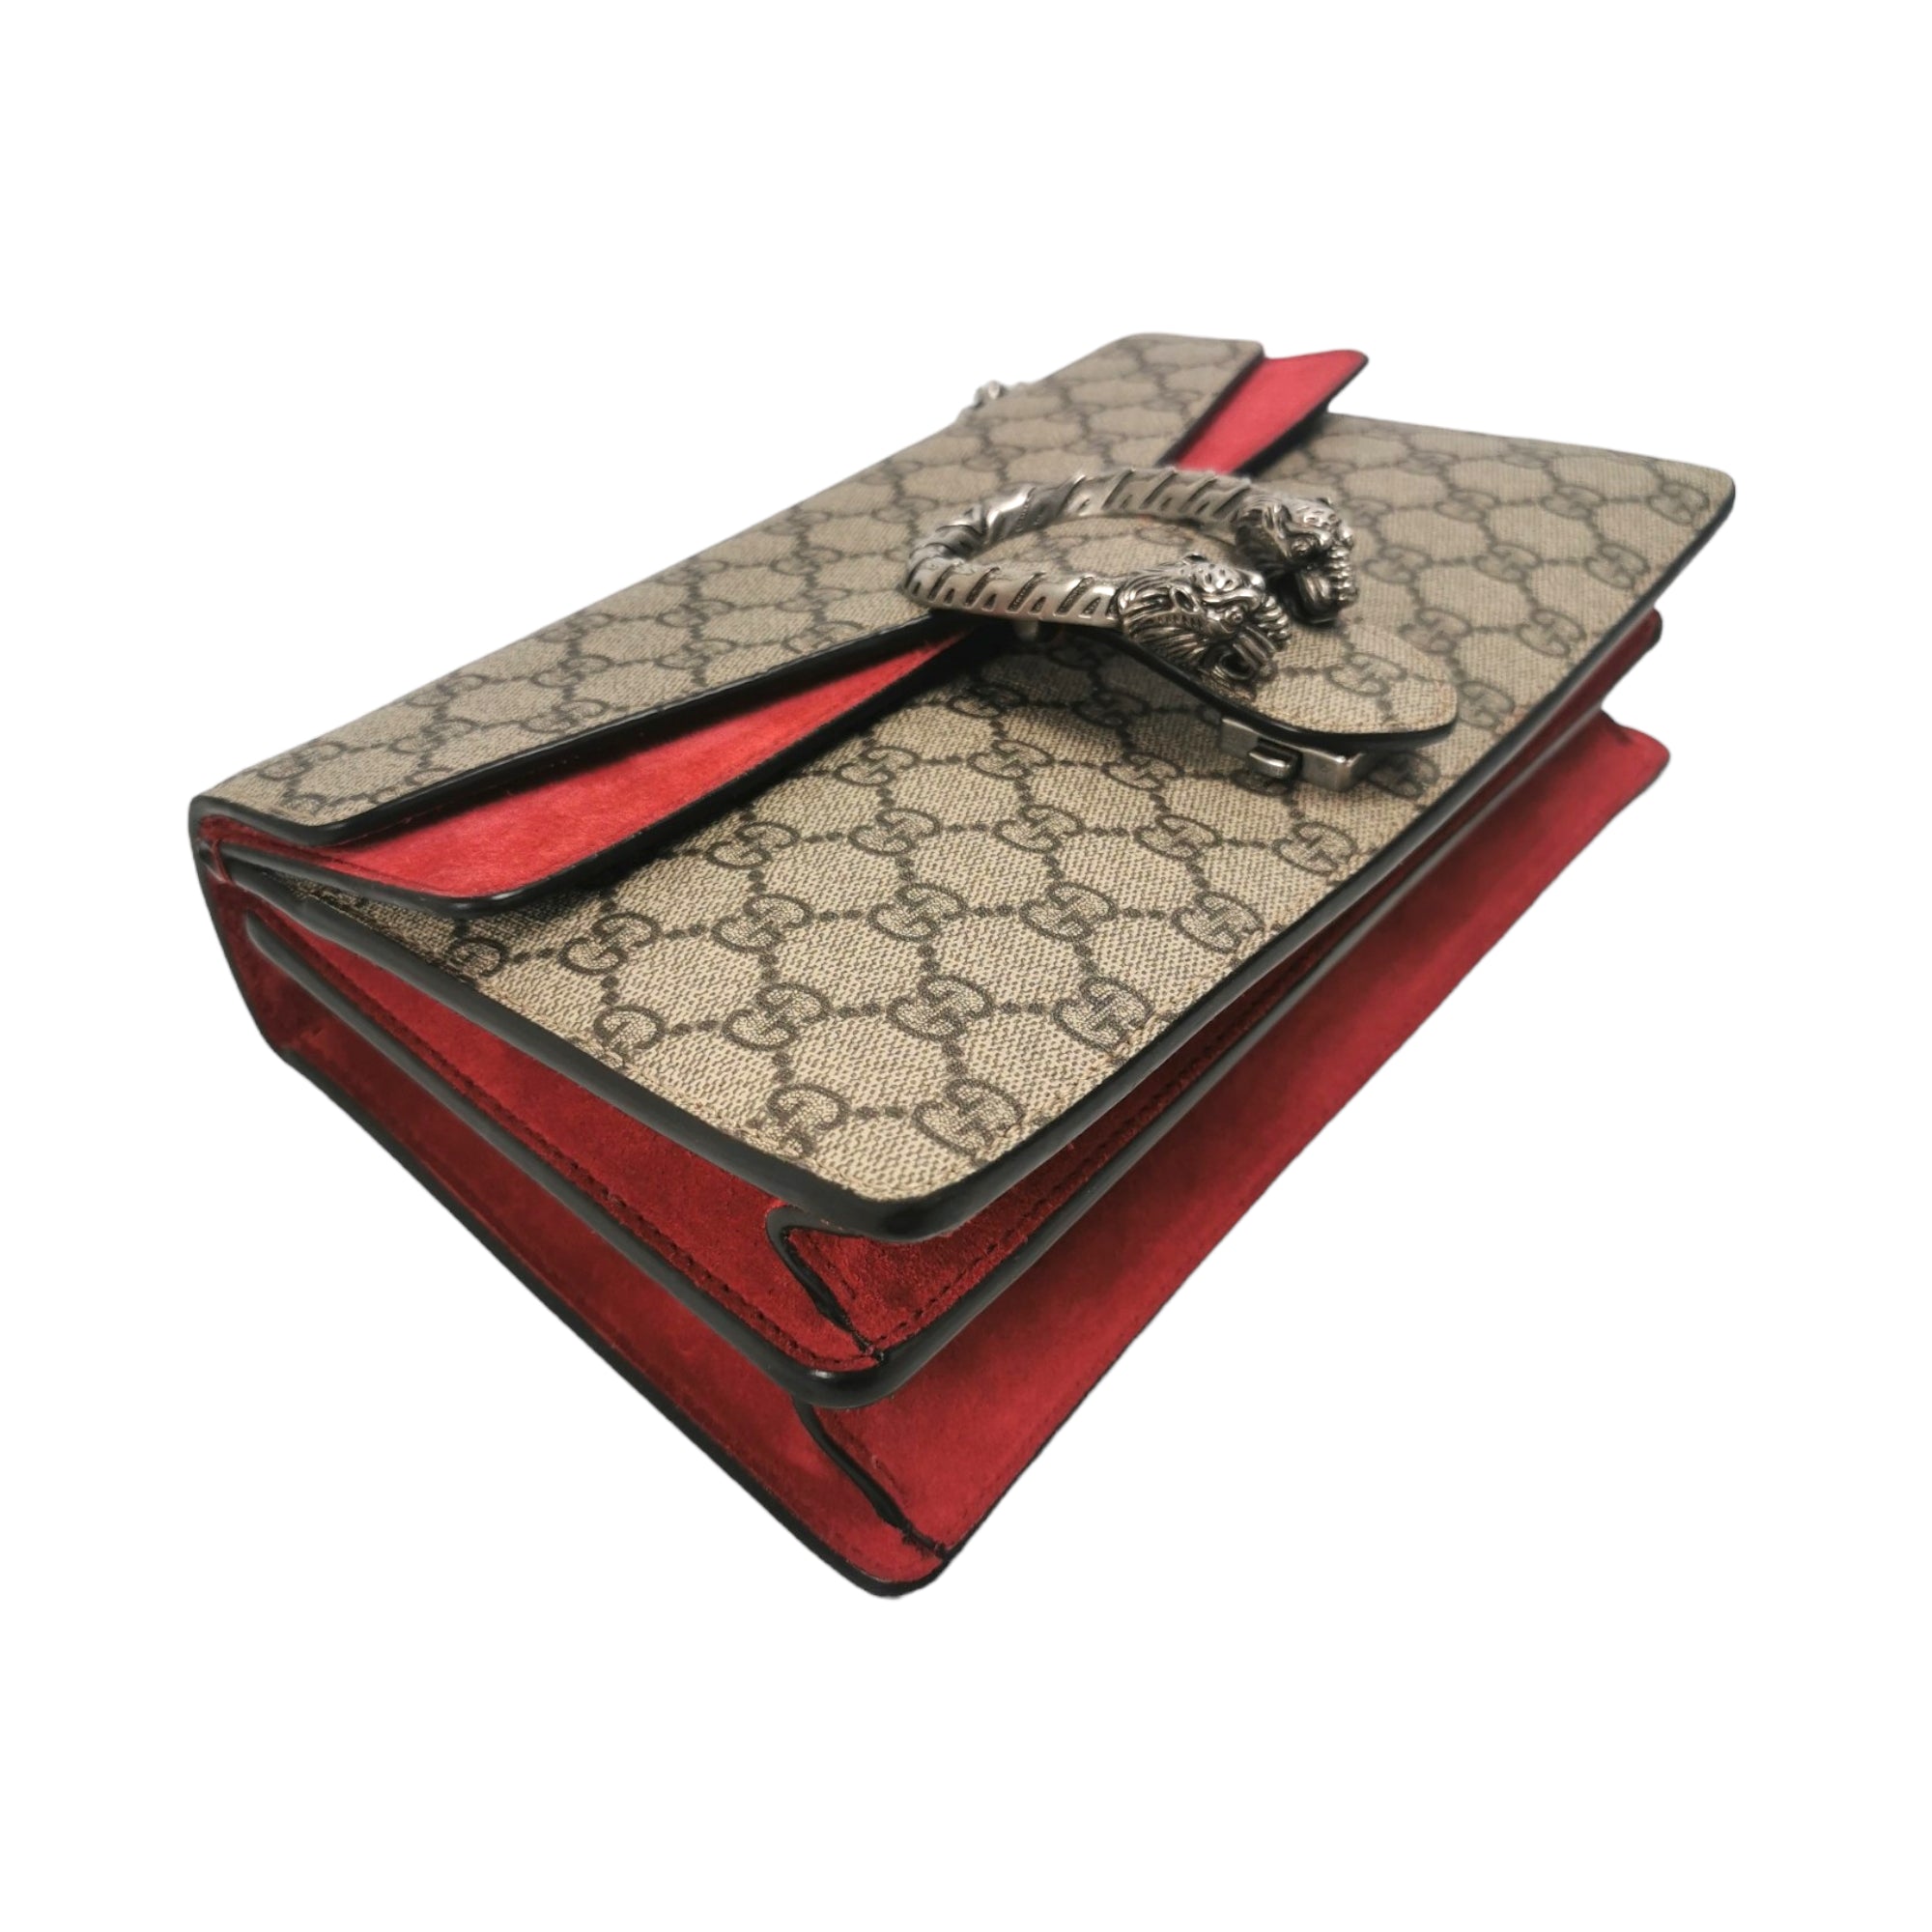 Gucci Dionysus Small GG Canvas Red